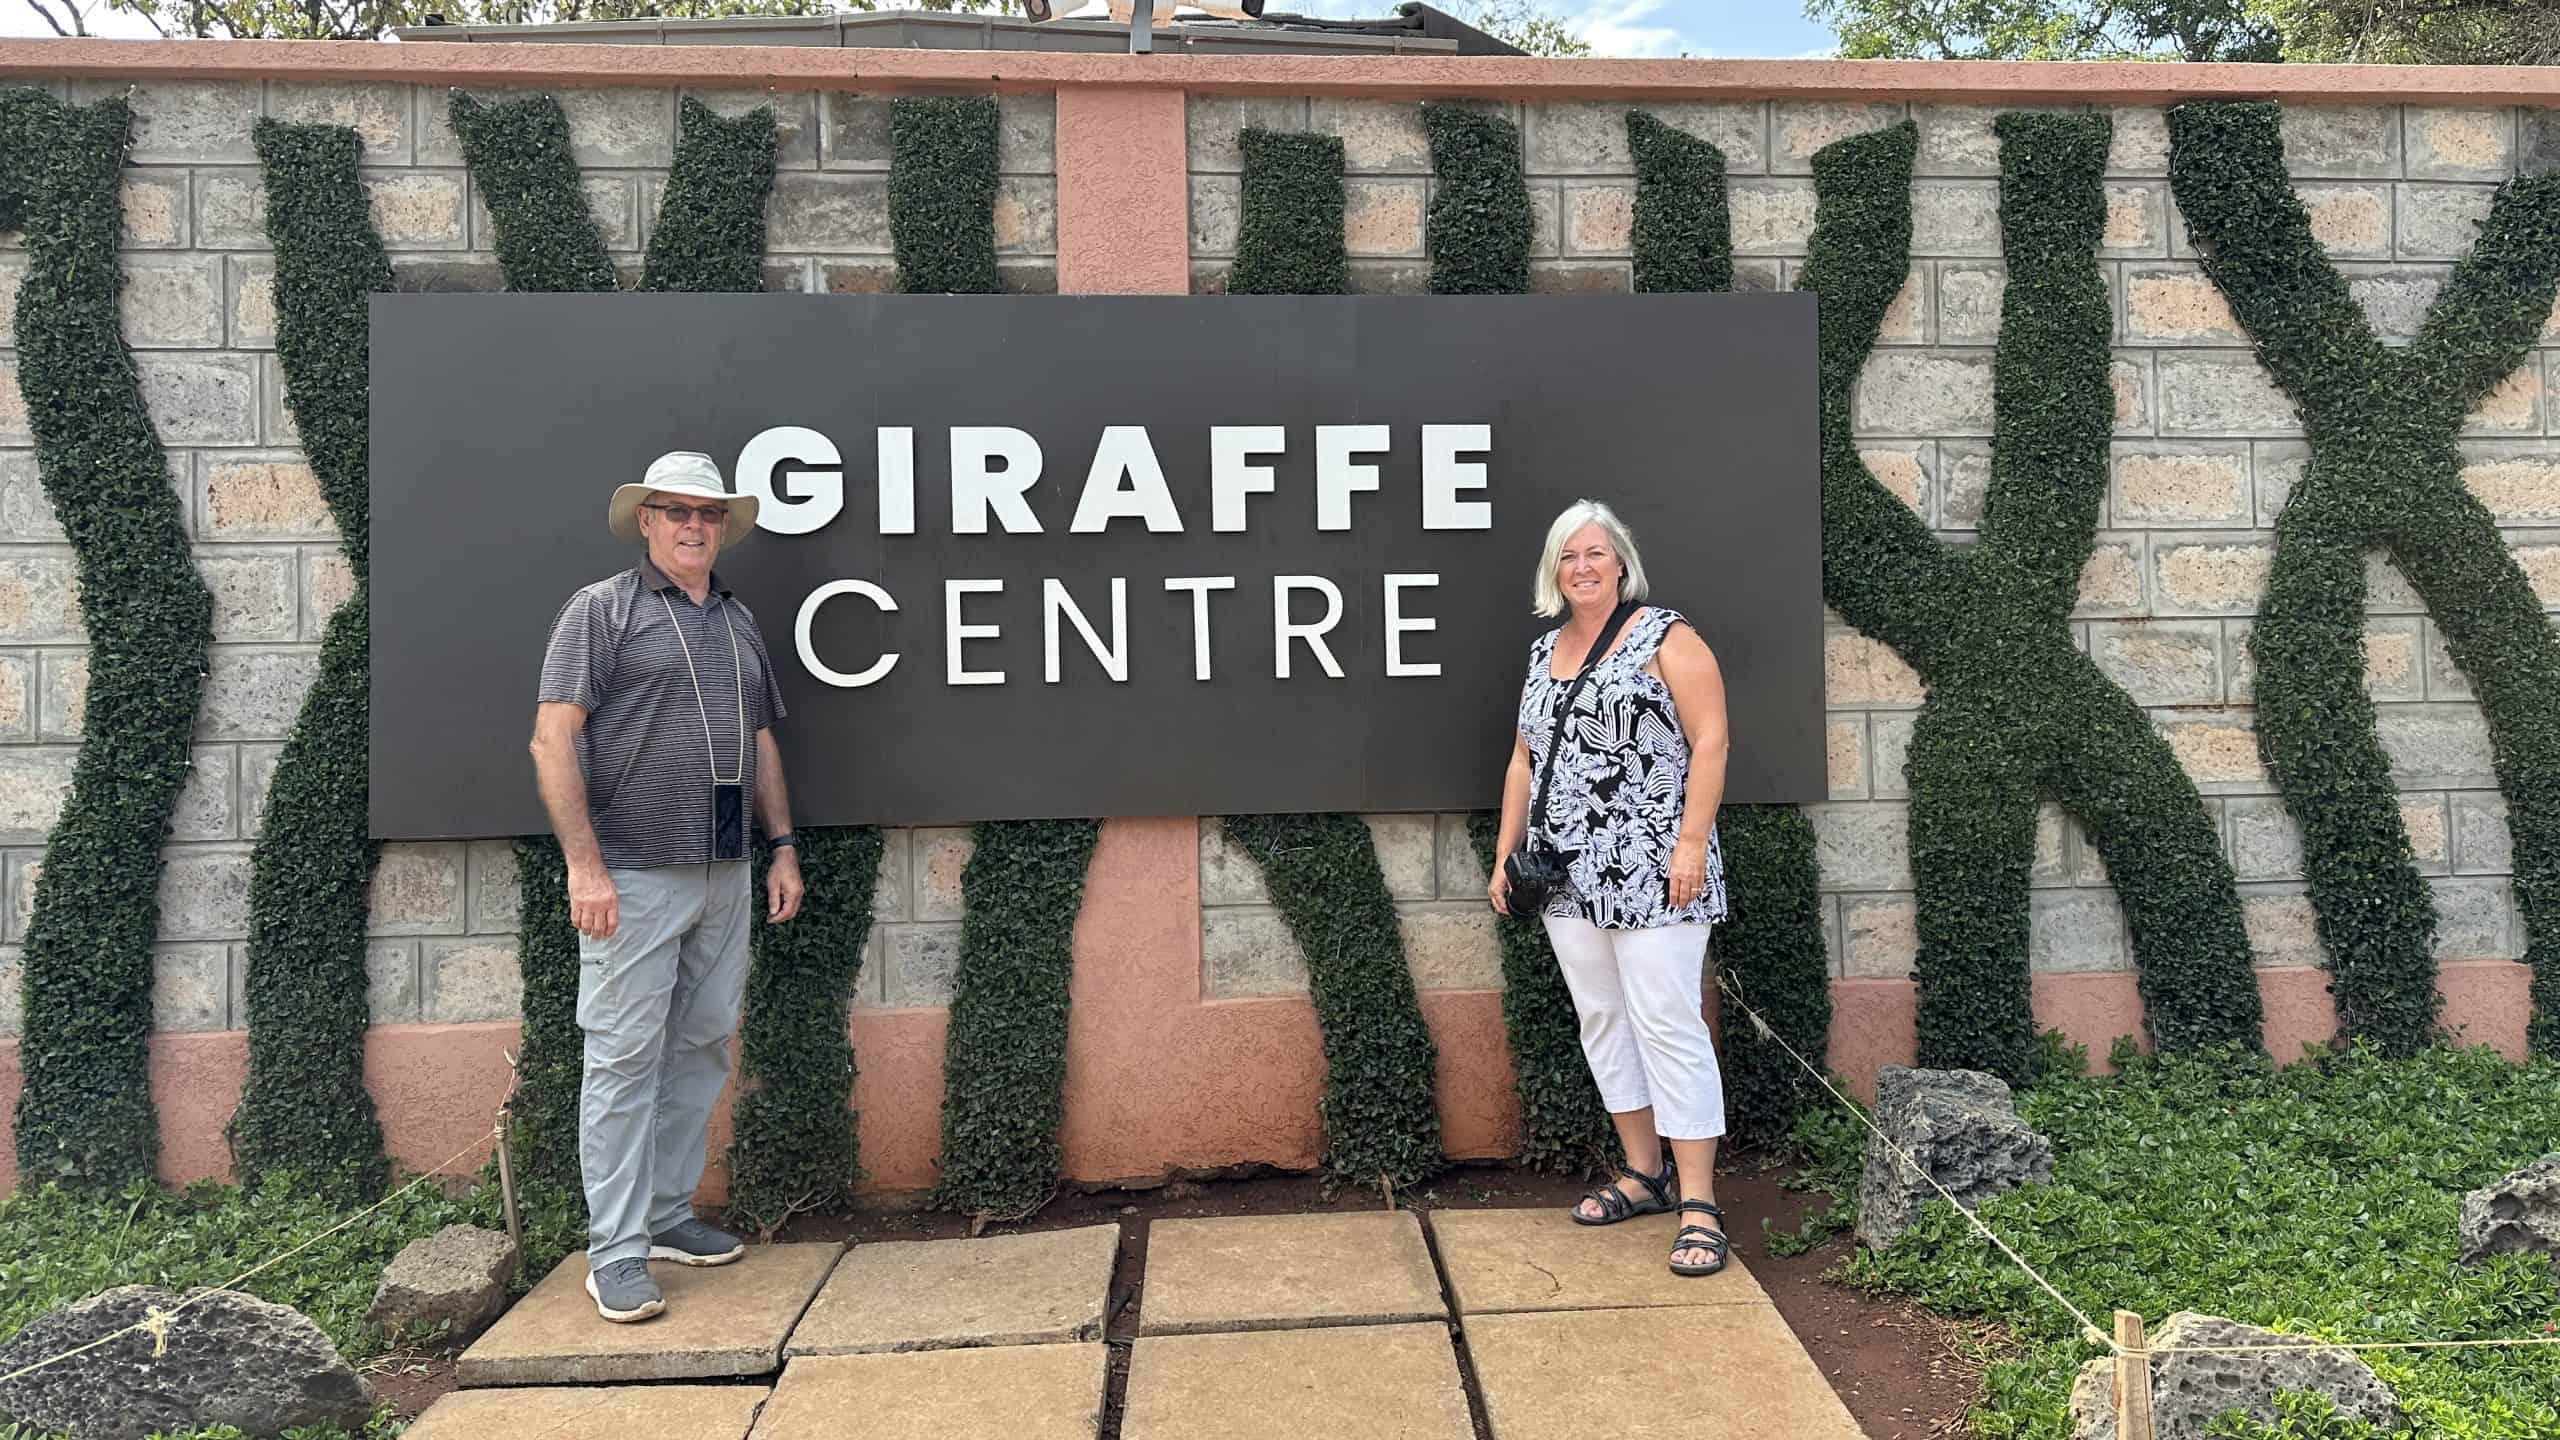 Our photo in front of the Giraffe Centre